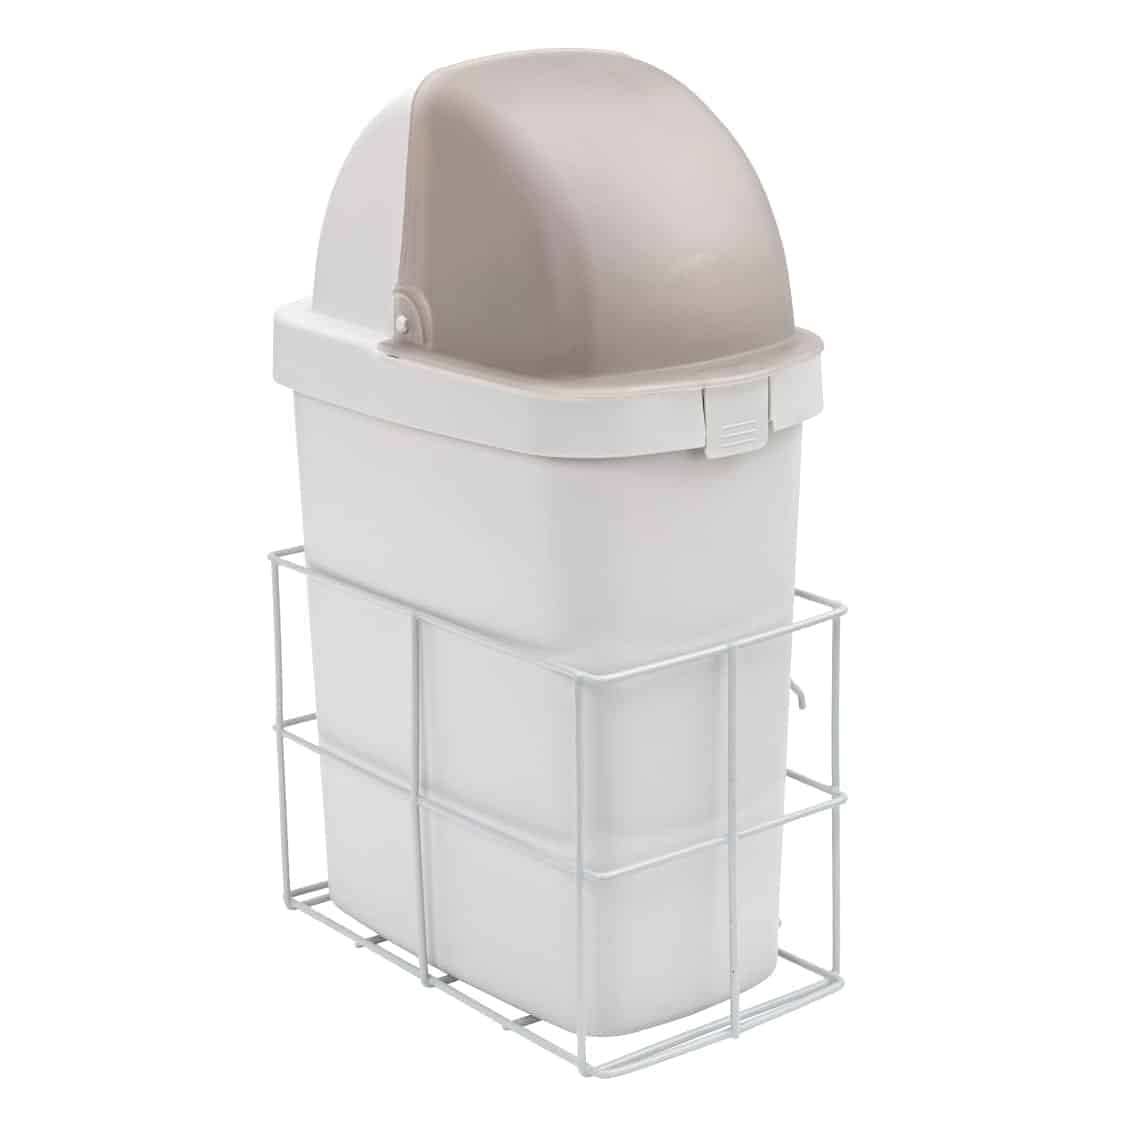 Waste container w/lid & side rail